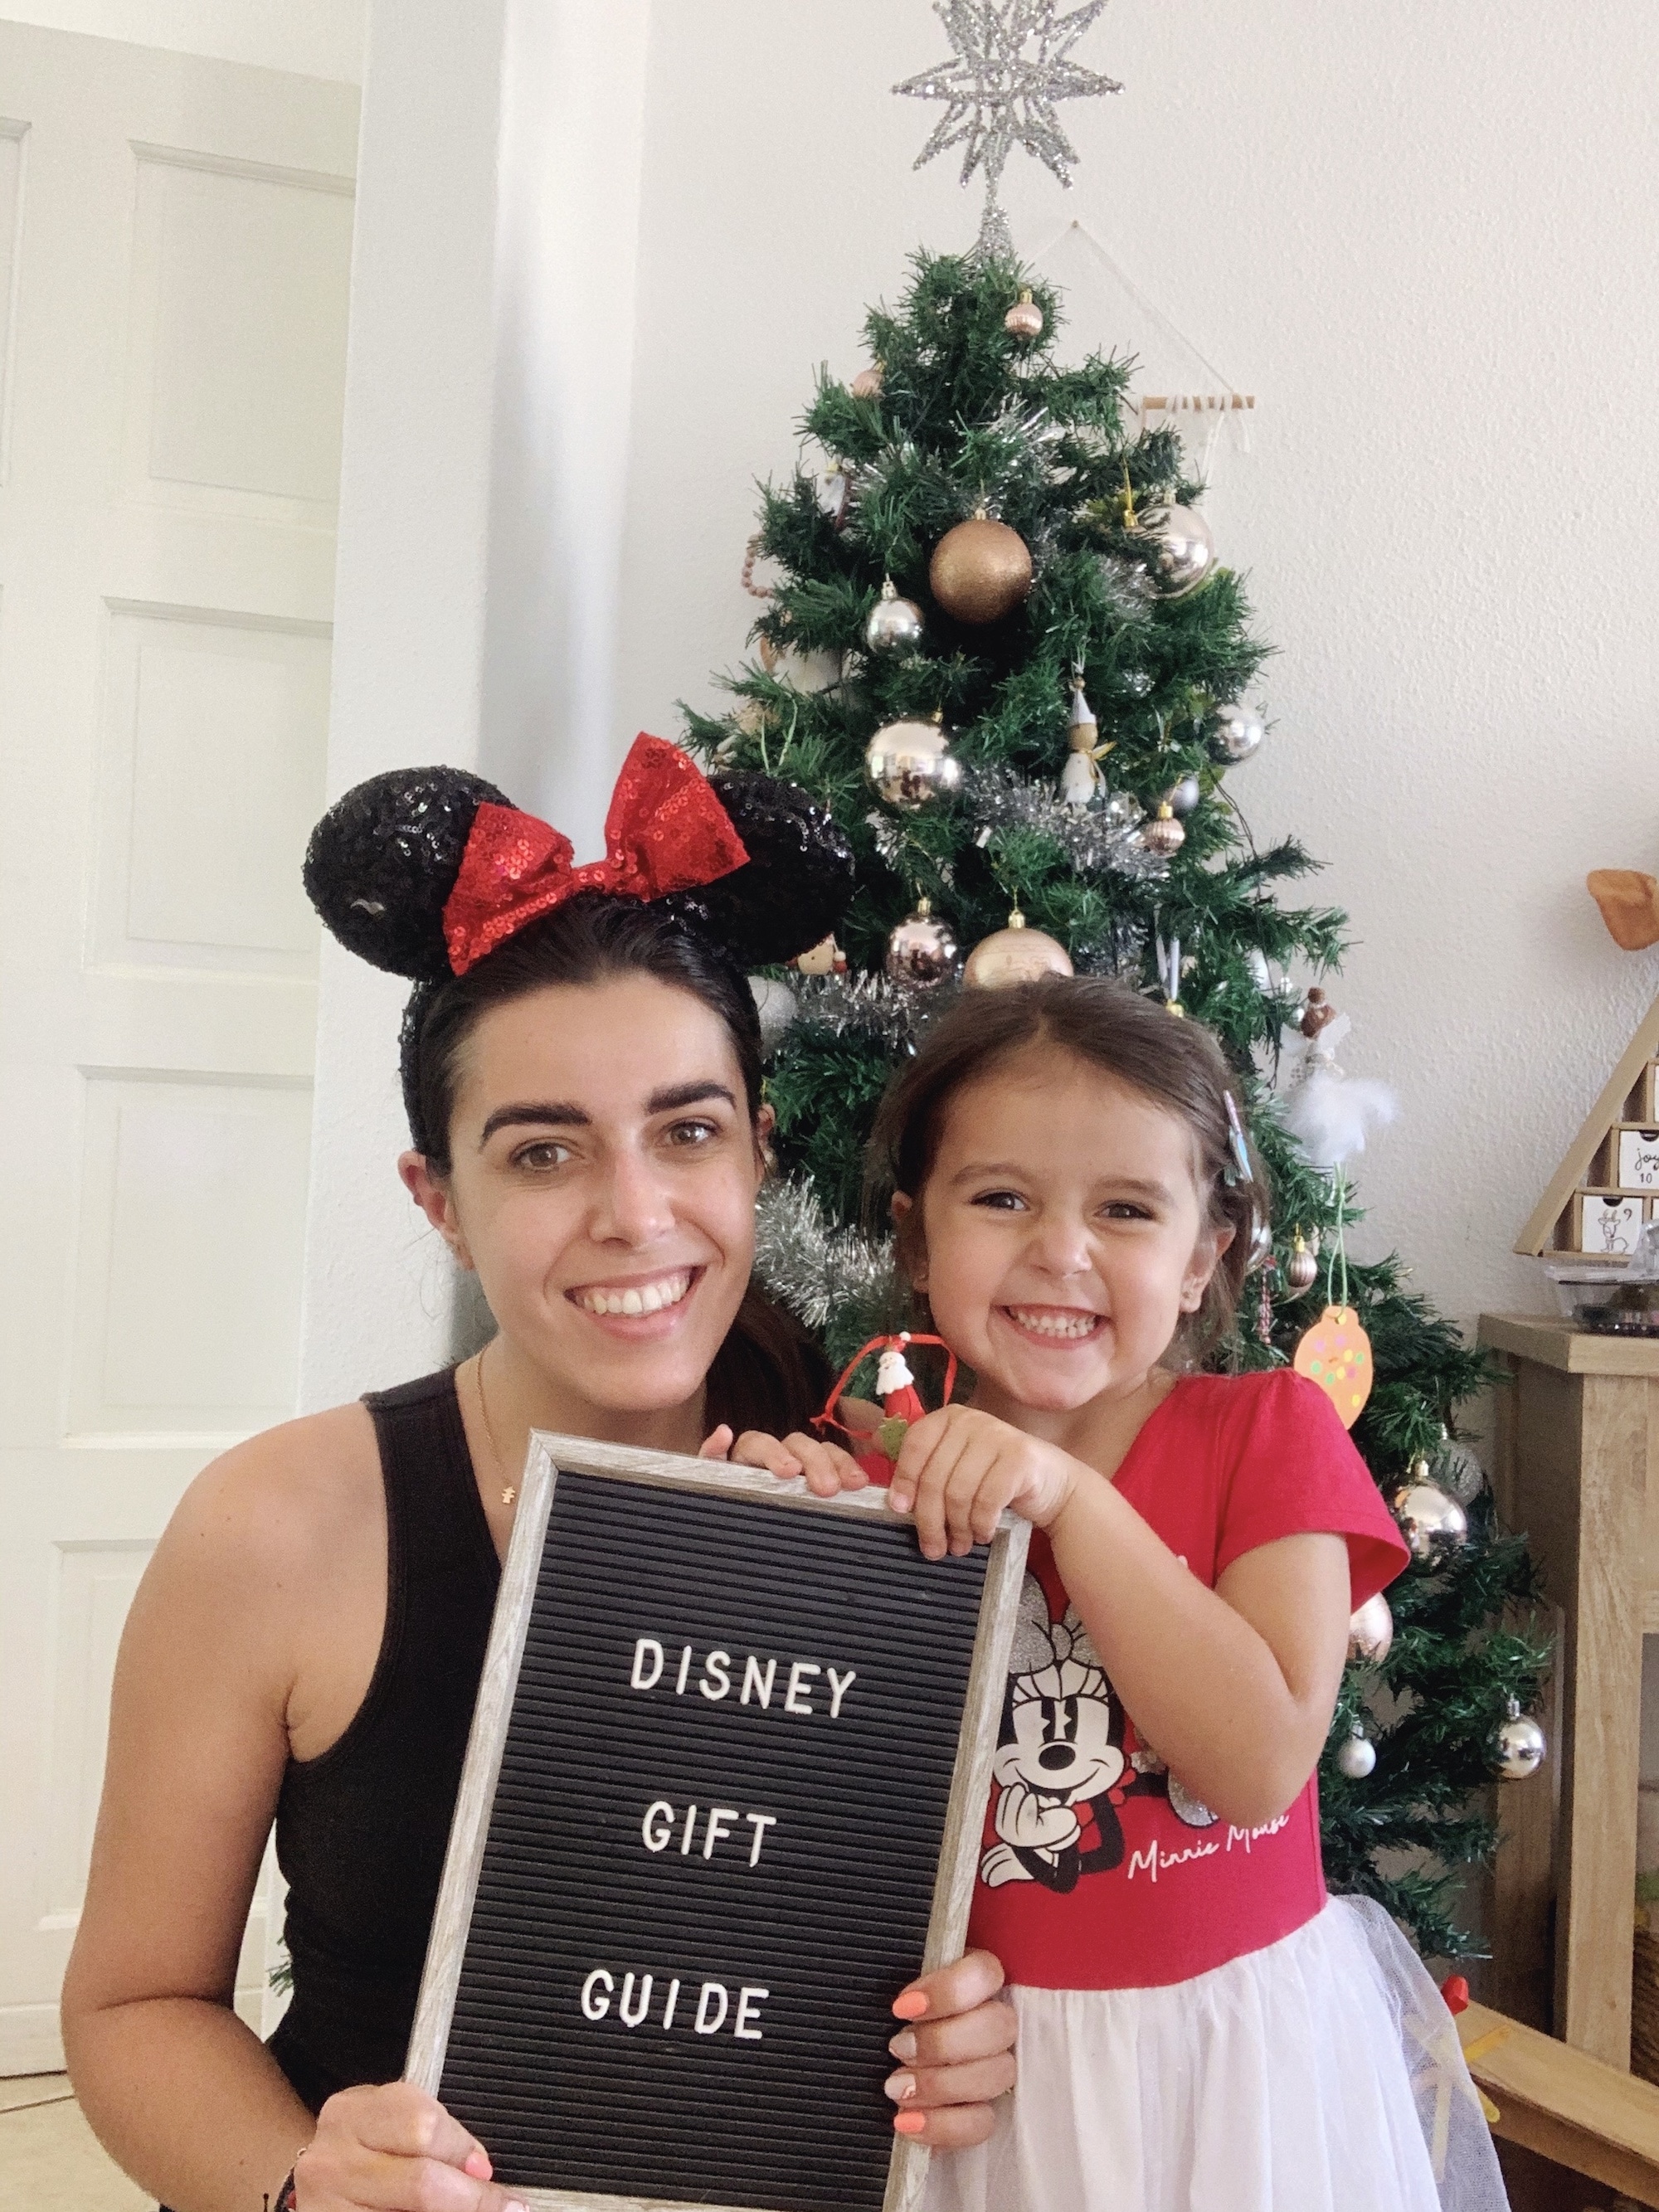 Disney Christmas Gift Guide 2020 by Nikita Camacho Hearts in Her Shoes